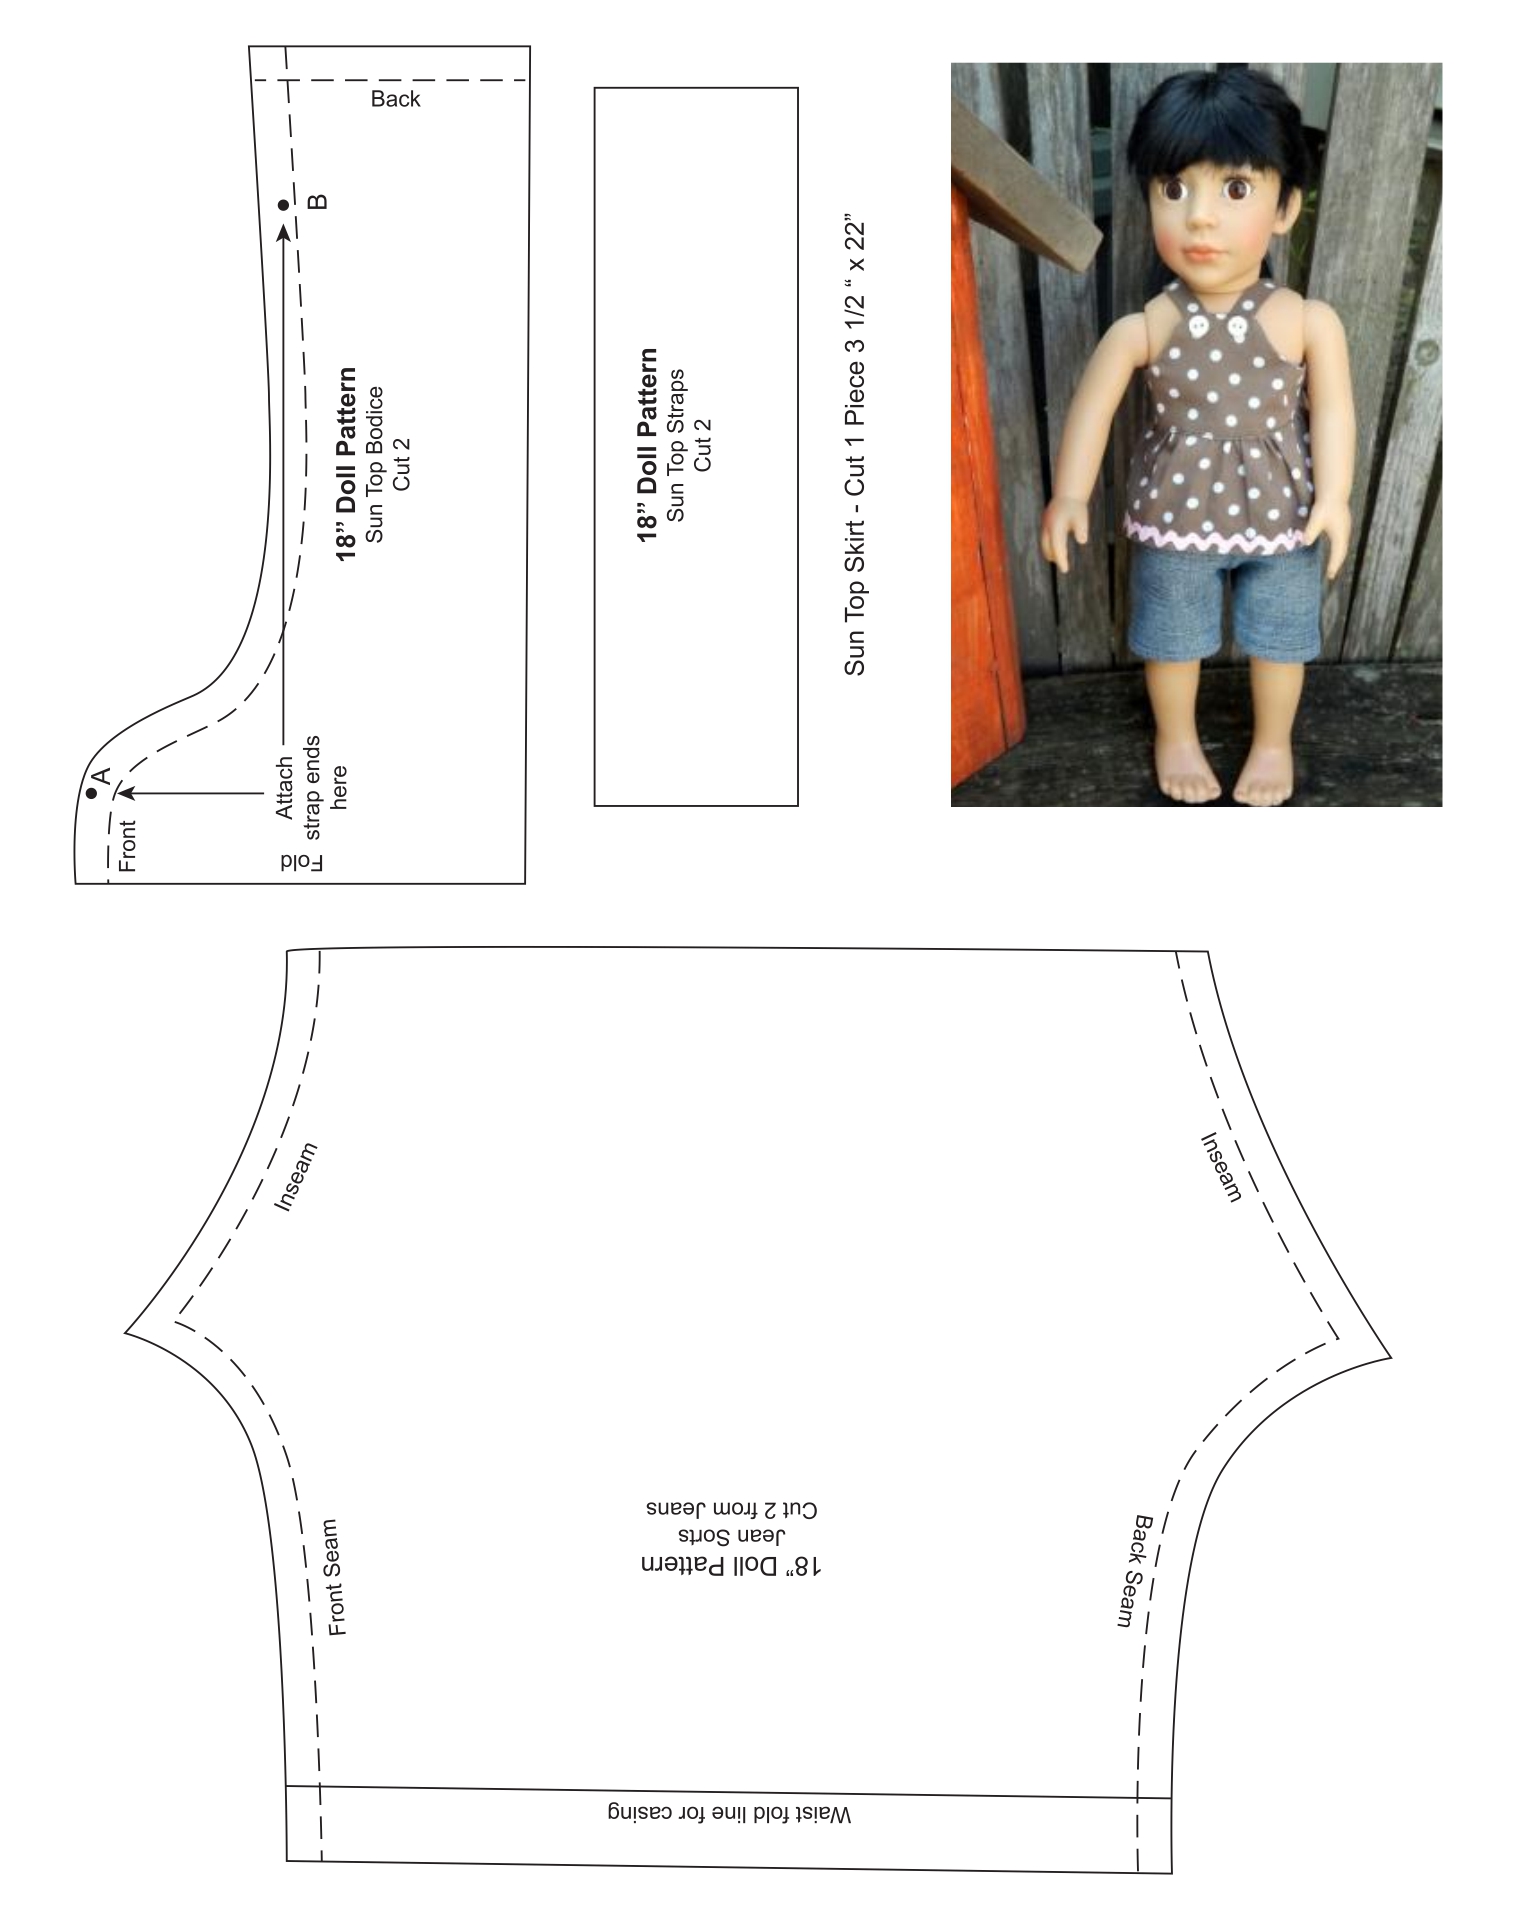 Doll Clothes Templates